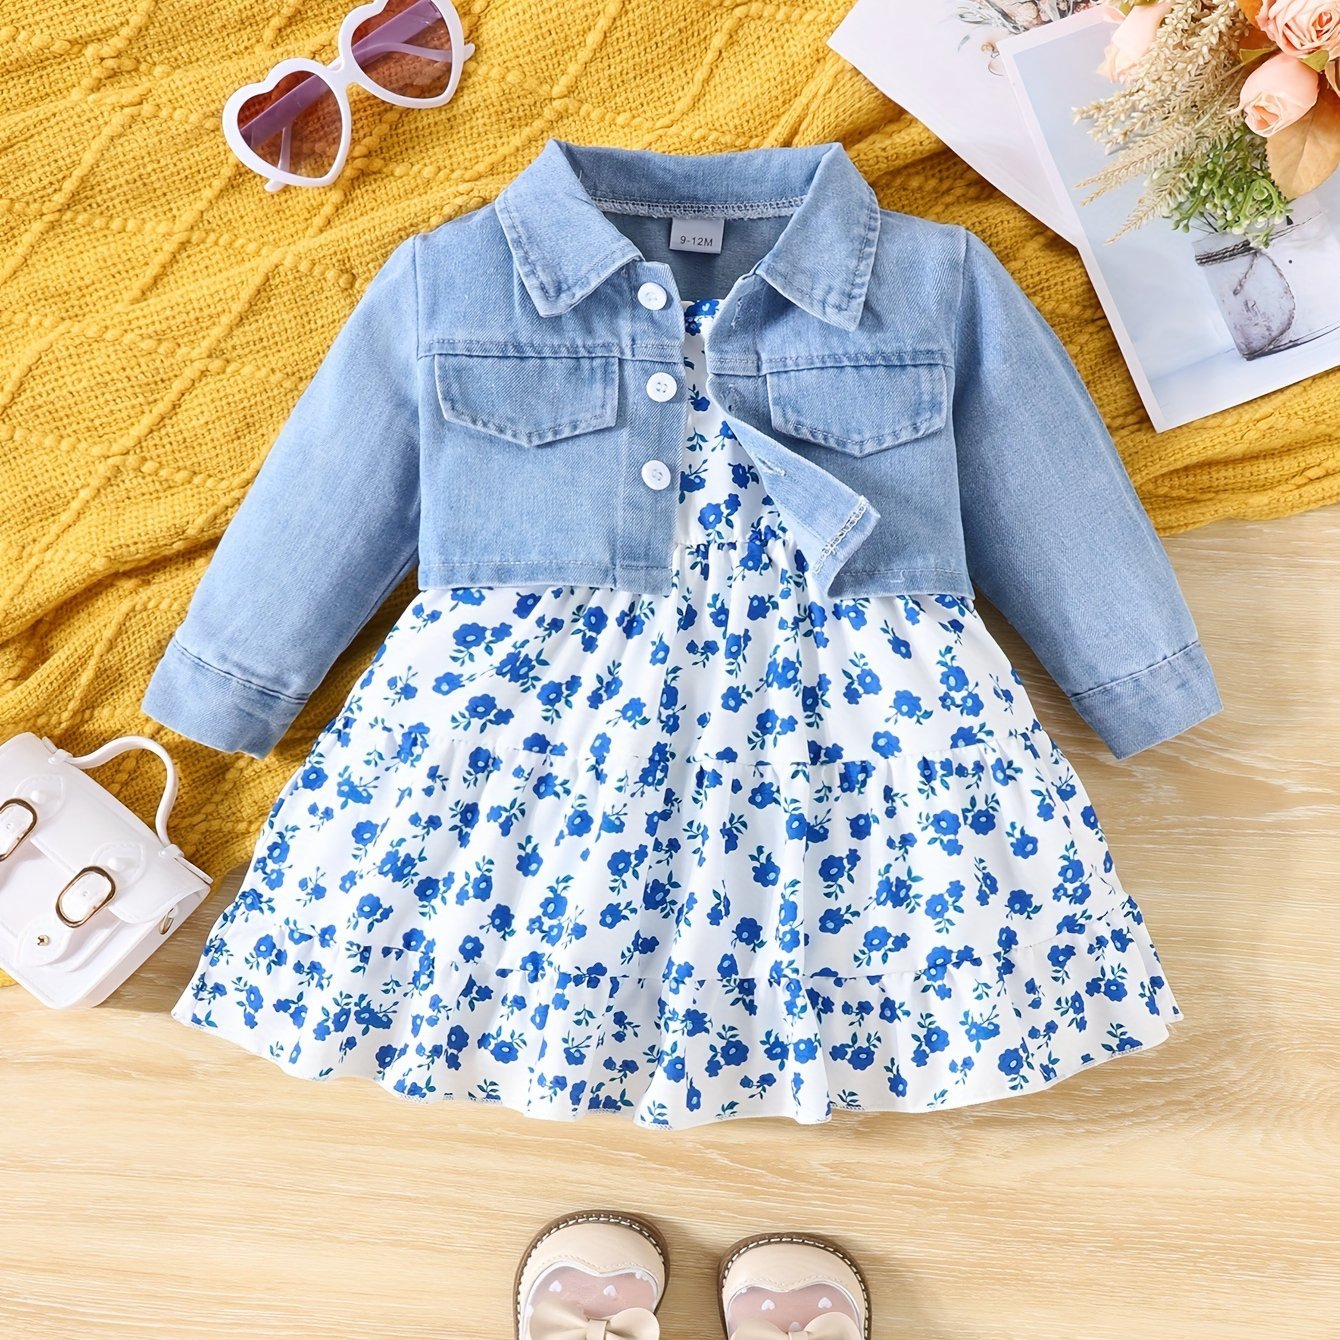 2pcs Adorable Baby Girls Denim Jacket Outfit - Stylish Floral Cami Dress with Button Front Jacket - Comfortable & Versatile 2 - Piece Set for Infant & Toddler Fashionistas - Ammpoure Wellbeing